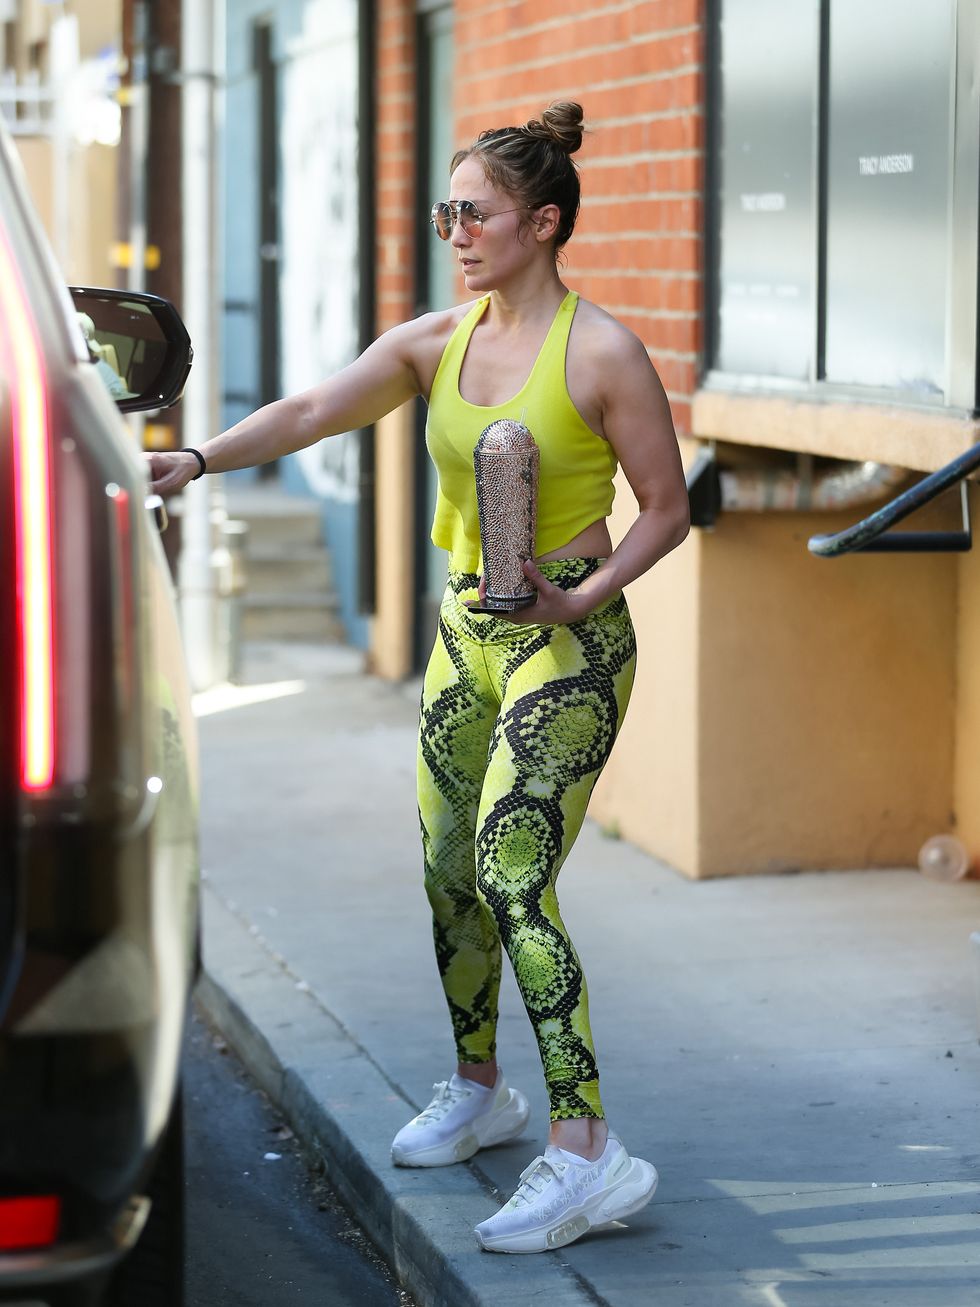 los angeles, ca july 19 jennifer lopez is seen on july 19, 2023 in los angeles, california photo by thecelebrityfinderbauer griffingc images